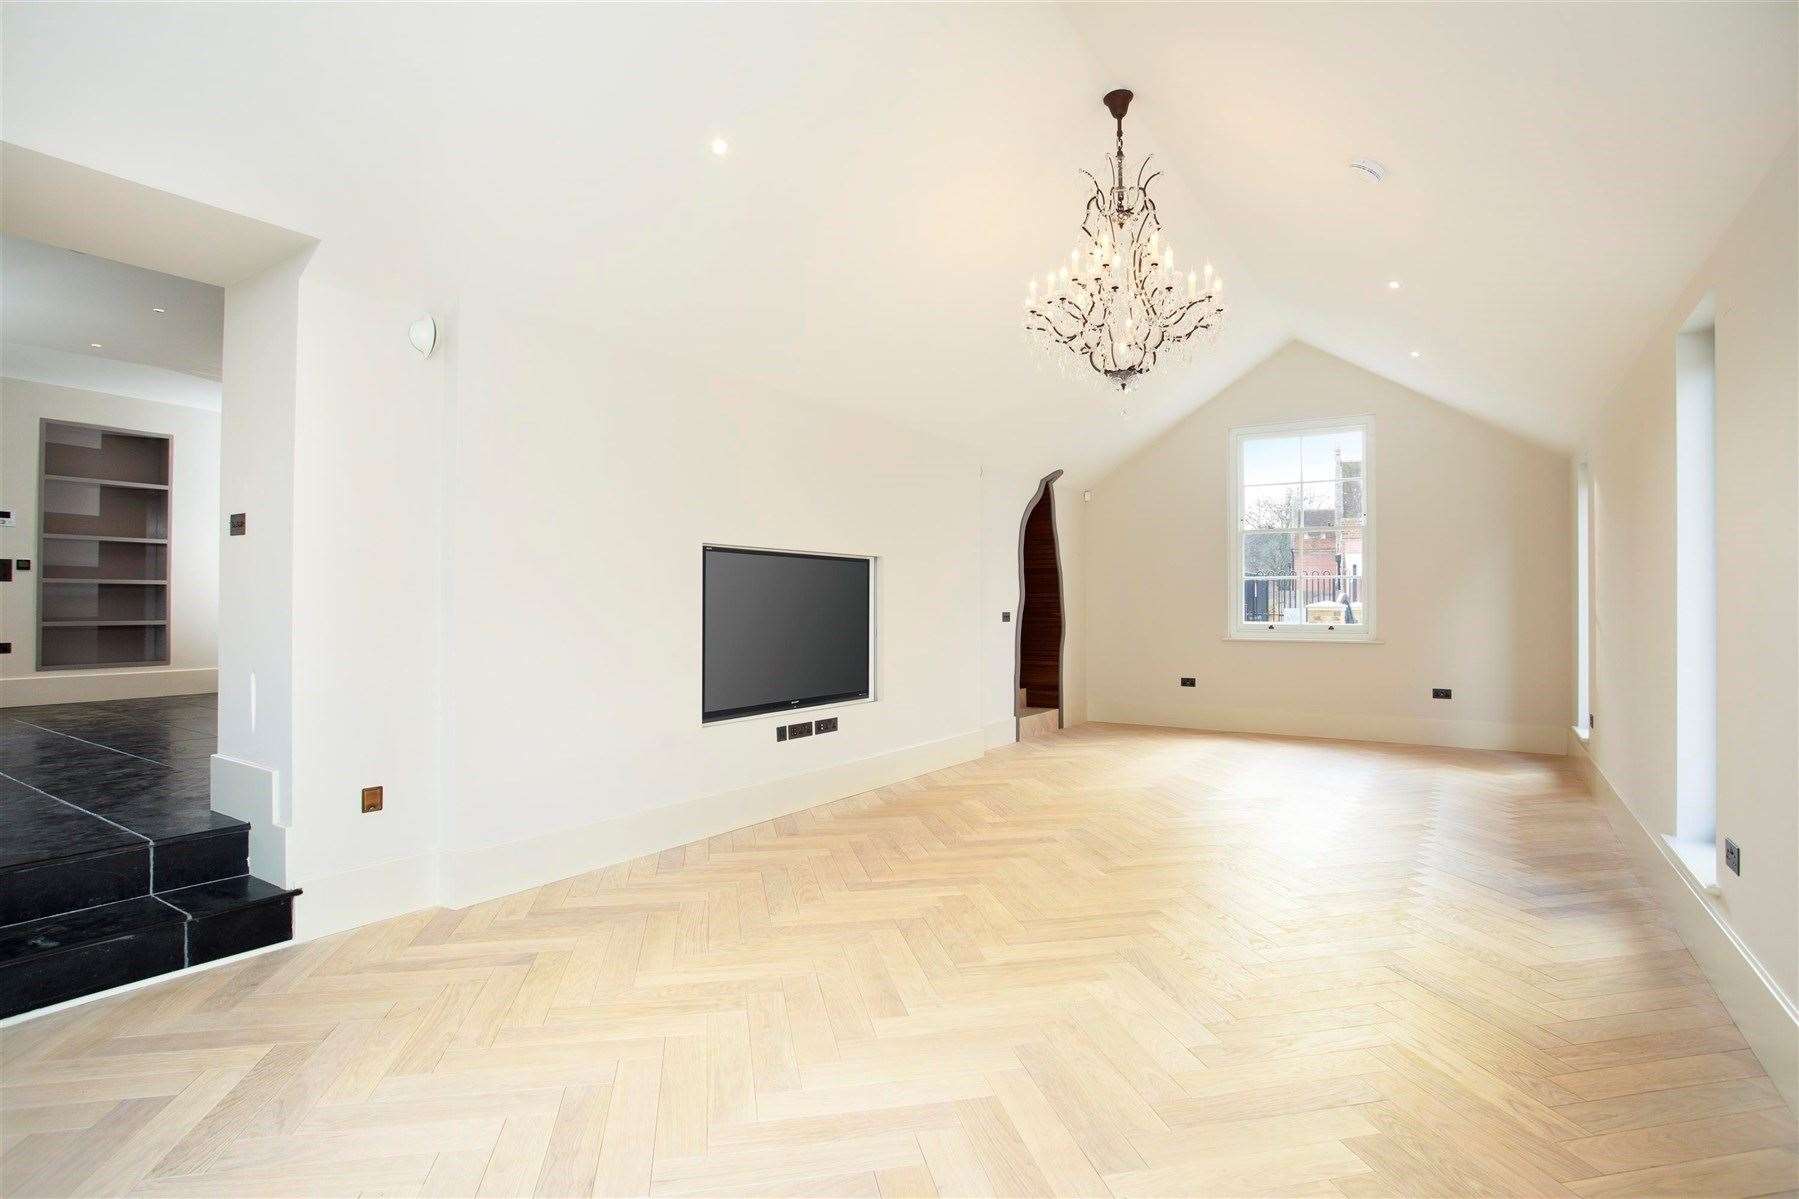 The reception rooms are open plan and full of natural light. Picture: Wards